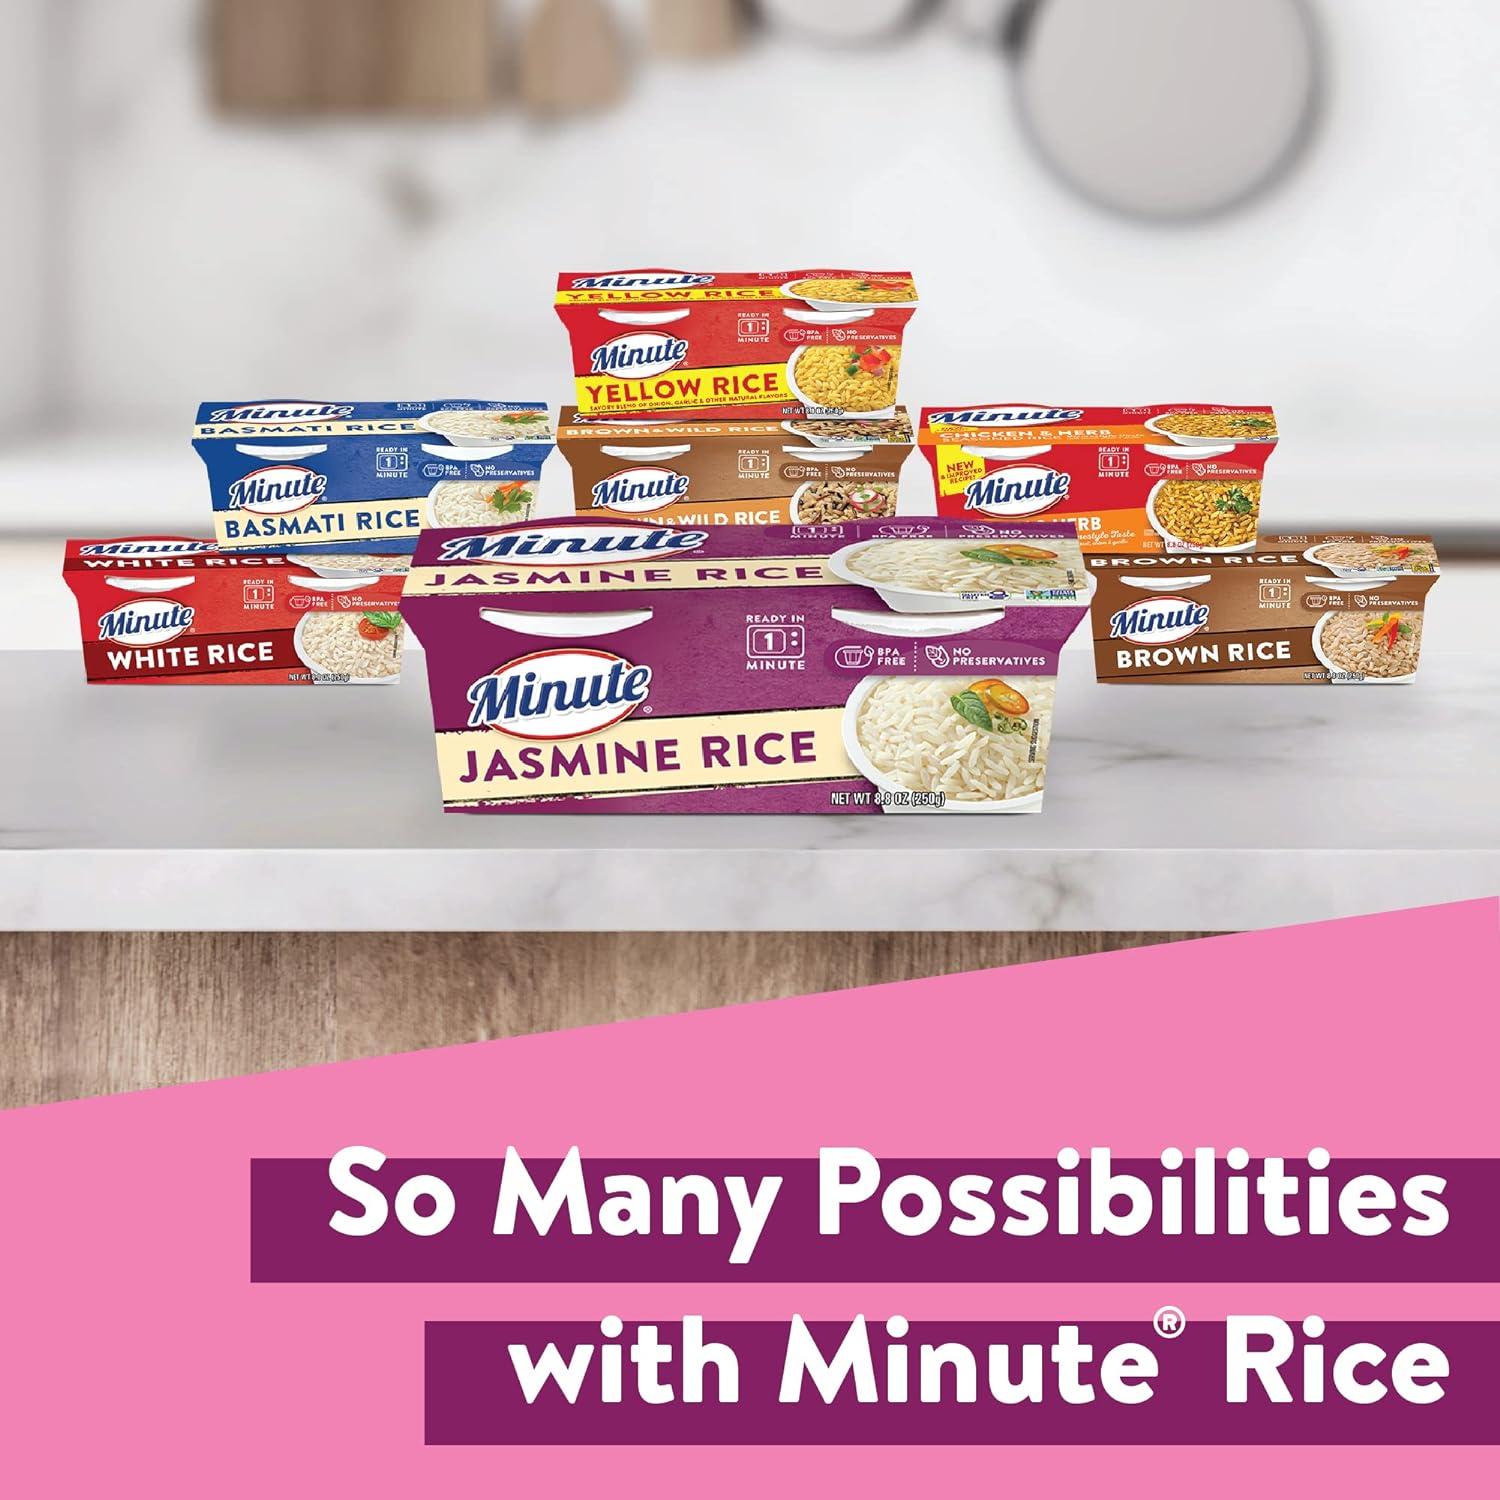 Minute Ready to Serve Long Grain White Rice 2 - 4.4 oz cups (Pack of 8)